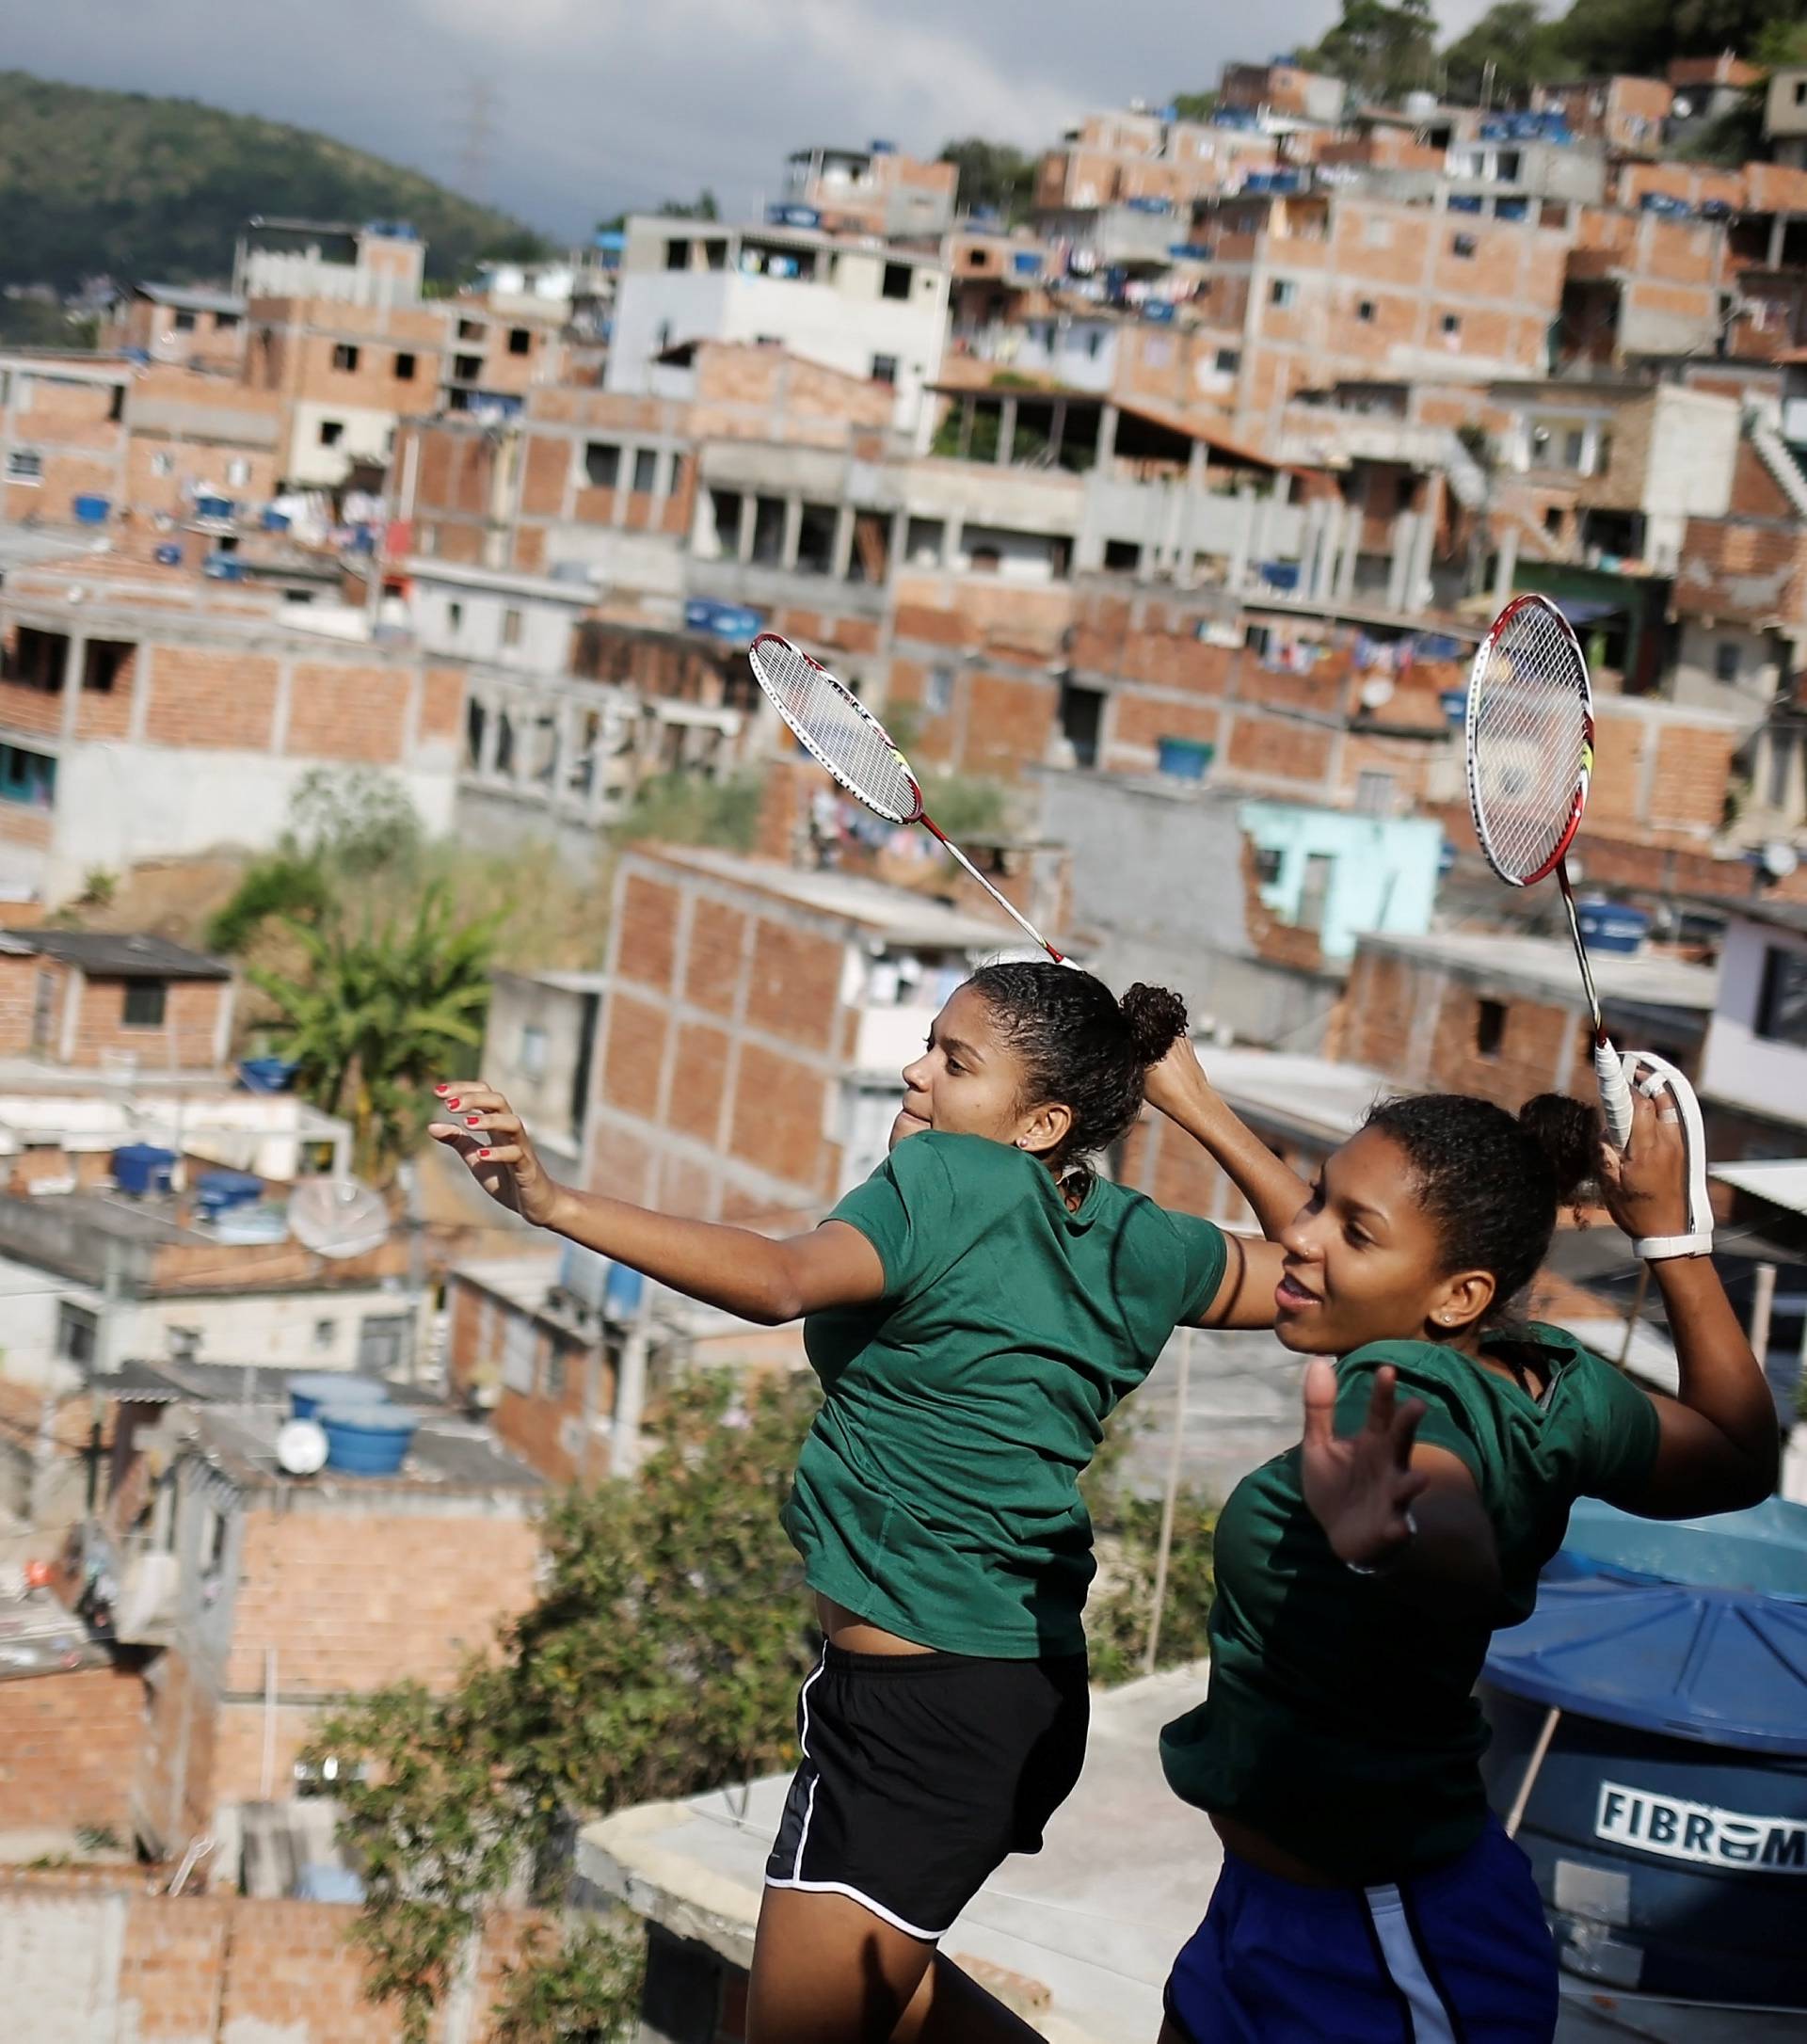 2016 Rio Olympics: Rio sisters: from violence to the Olympics